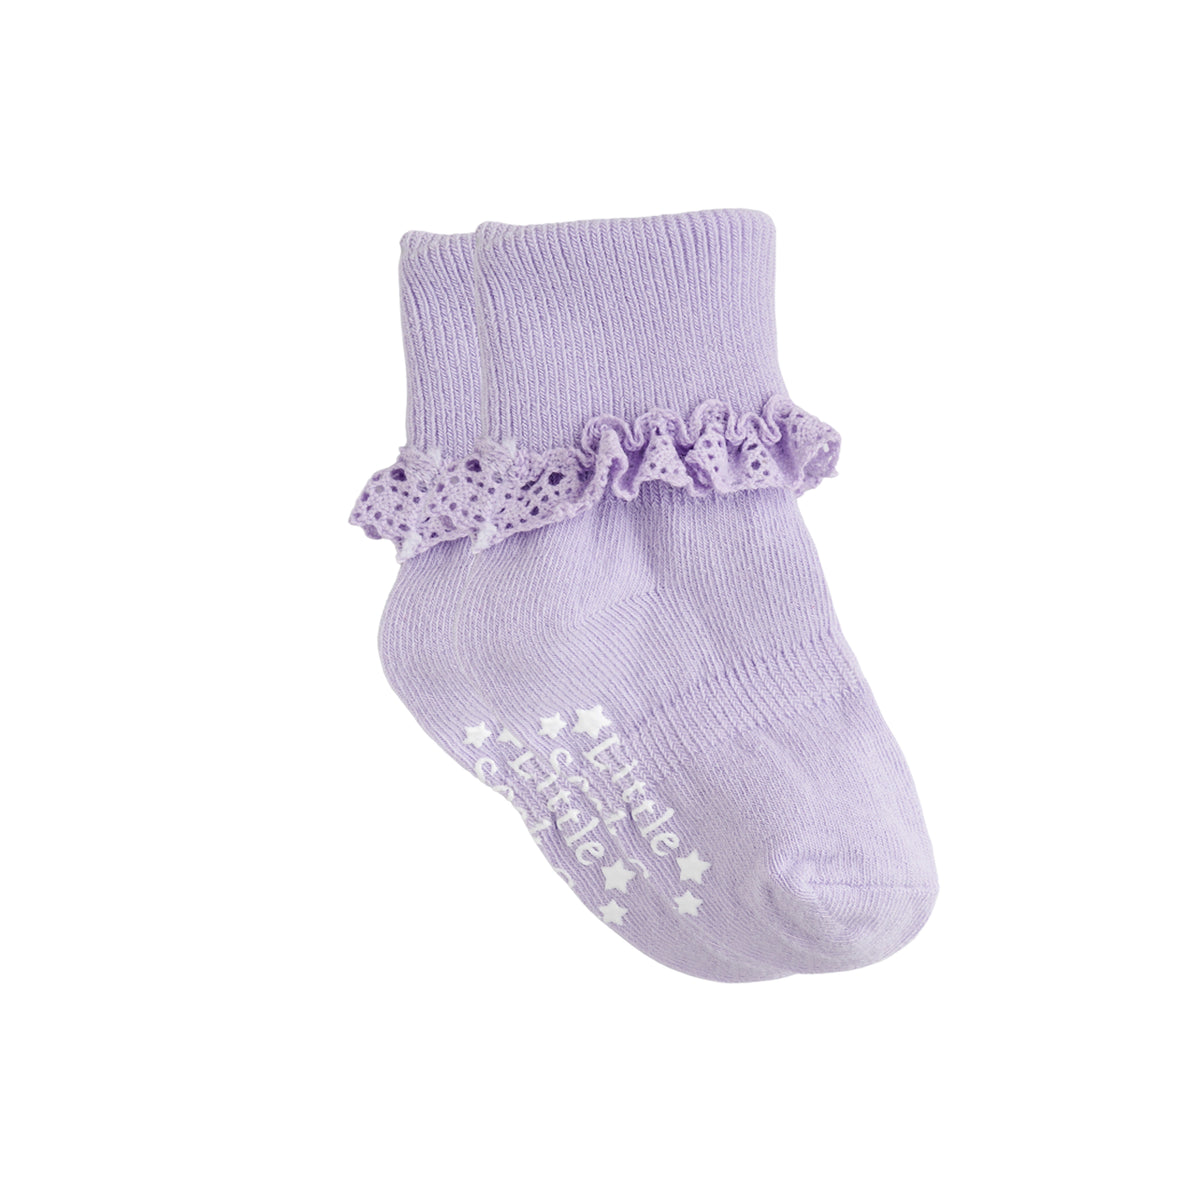 Frilly Non-Slip Stay-On Baby and Toddler Socks - Amethyst